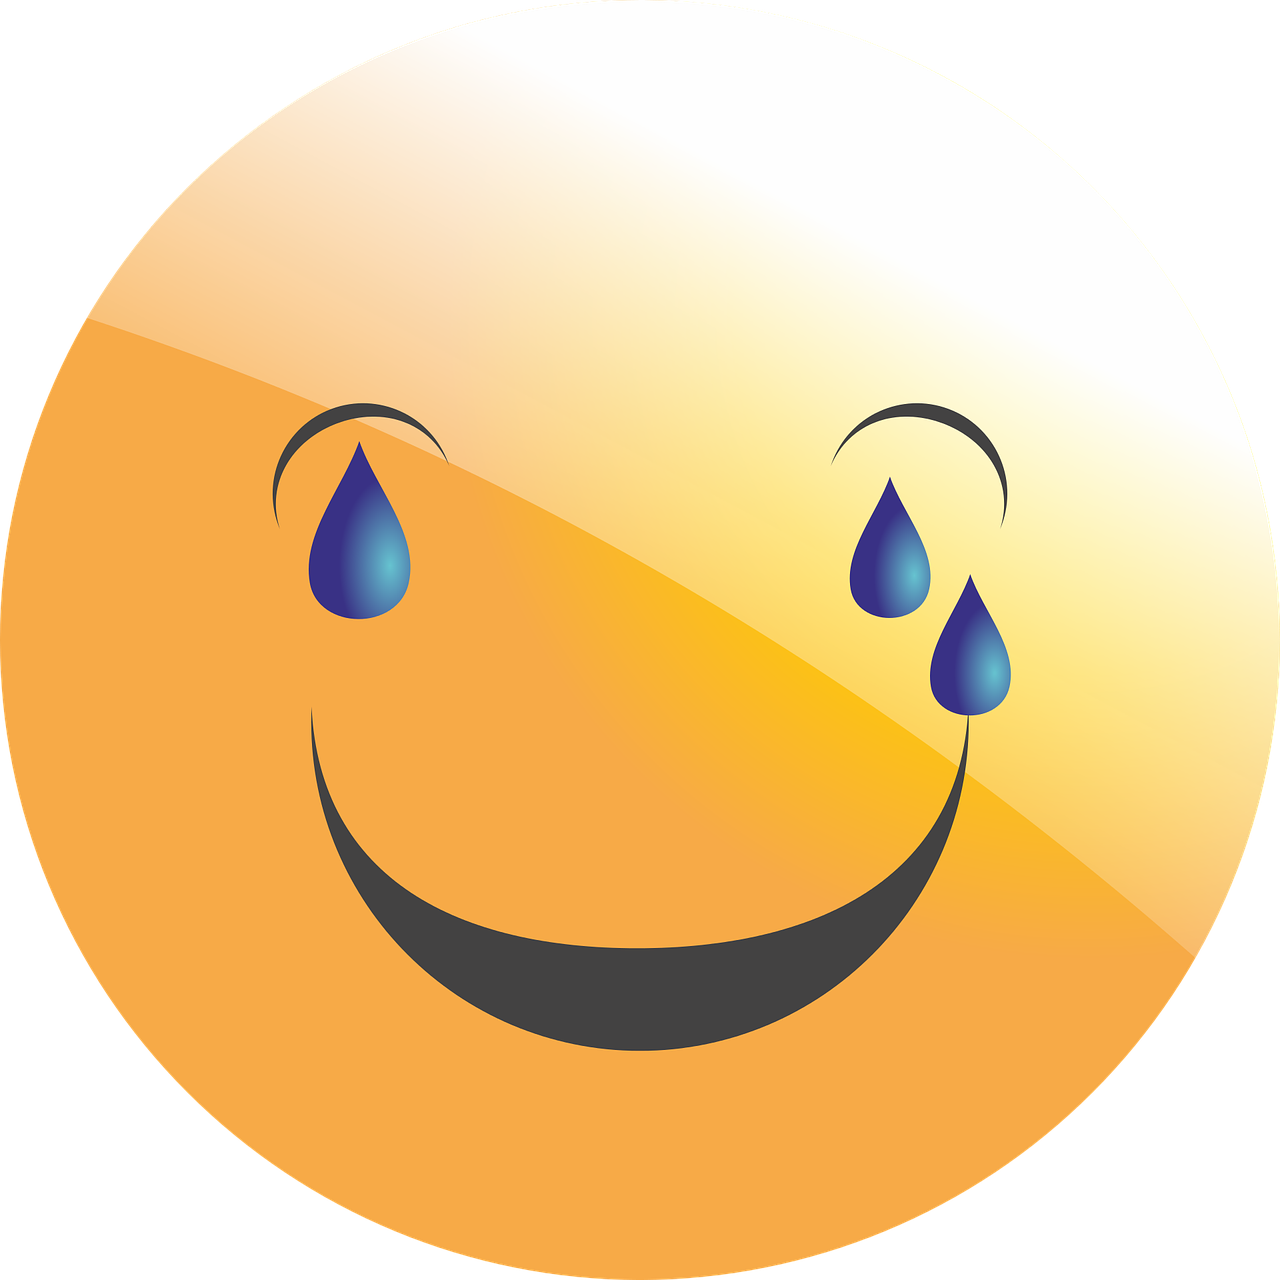 a smiley face with a tear coming out of it, a cartoon, mingei, glossy from rain, no gradients, slick!!, drip